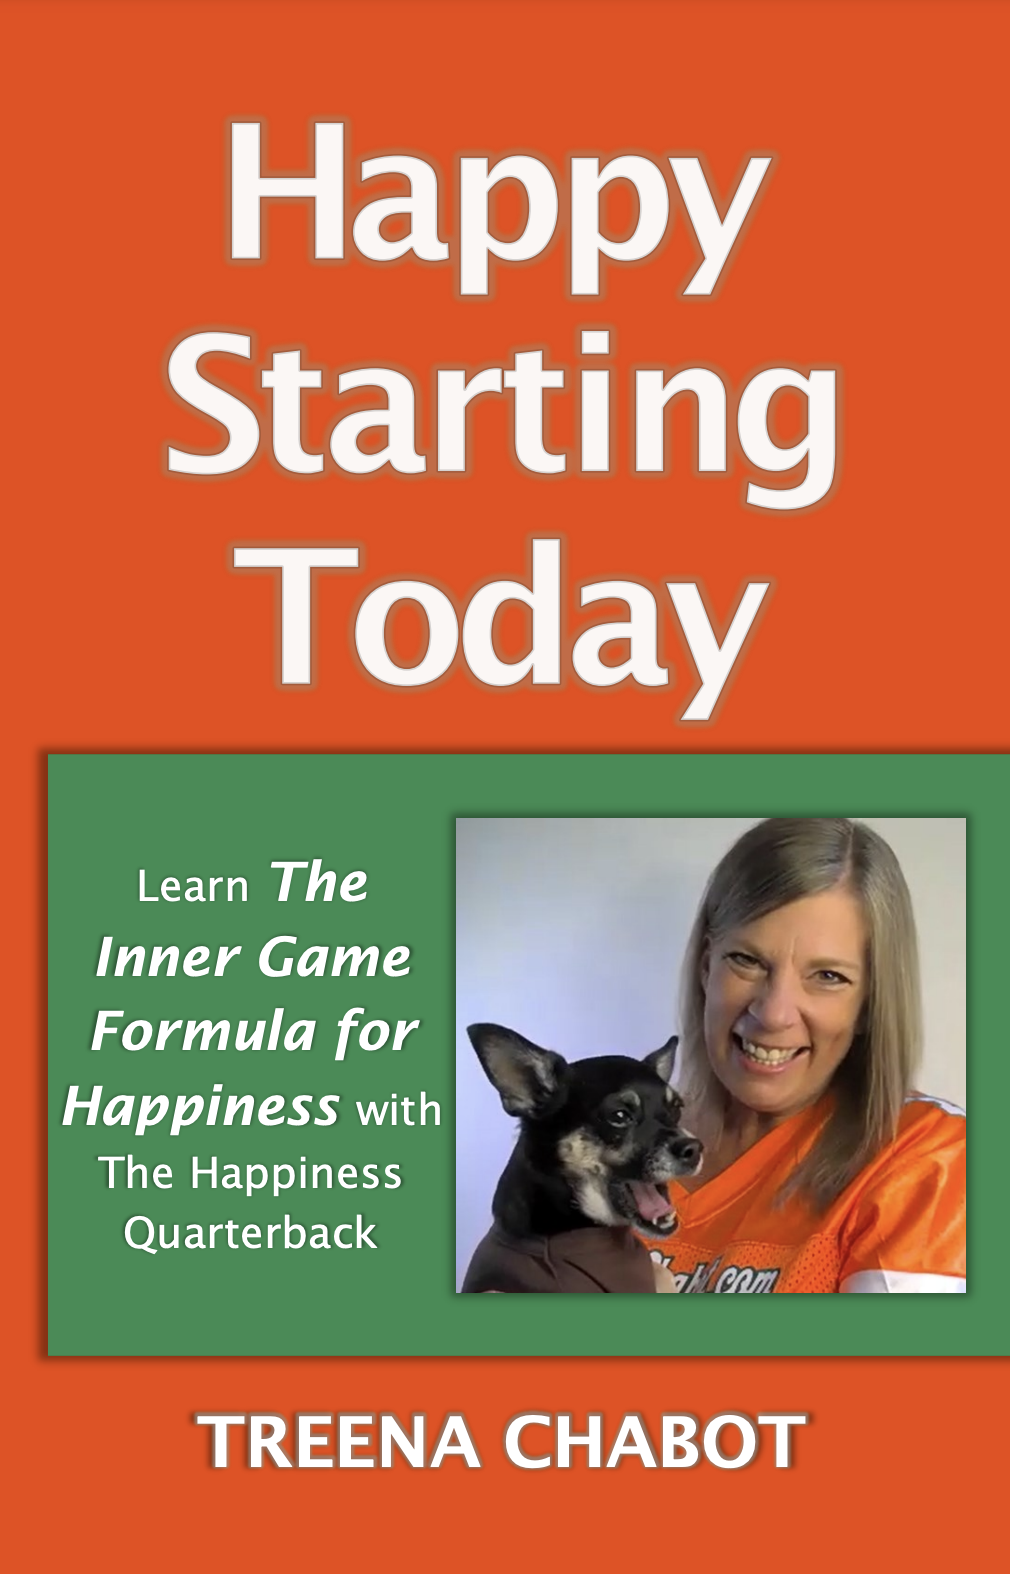 happy starting today by Treena Chabot book cover